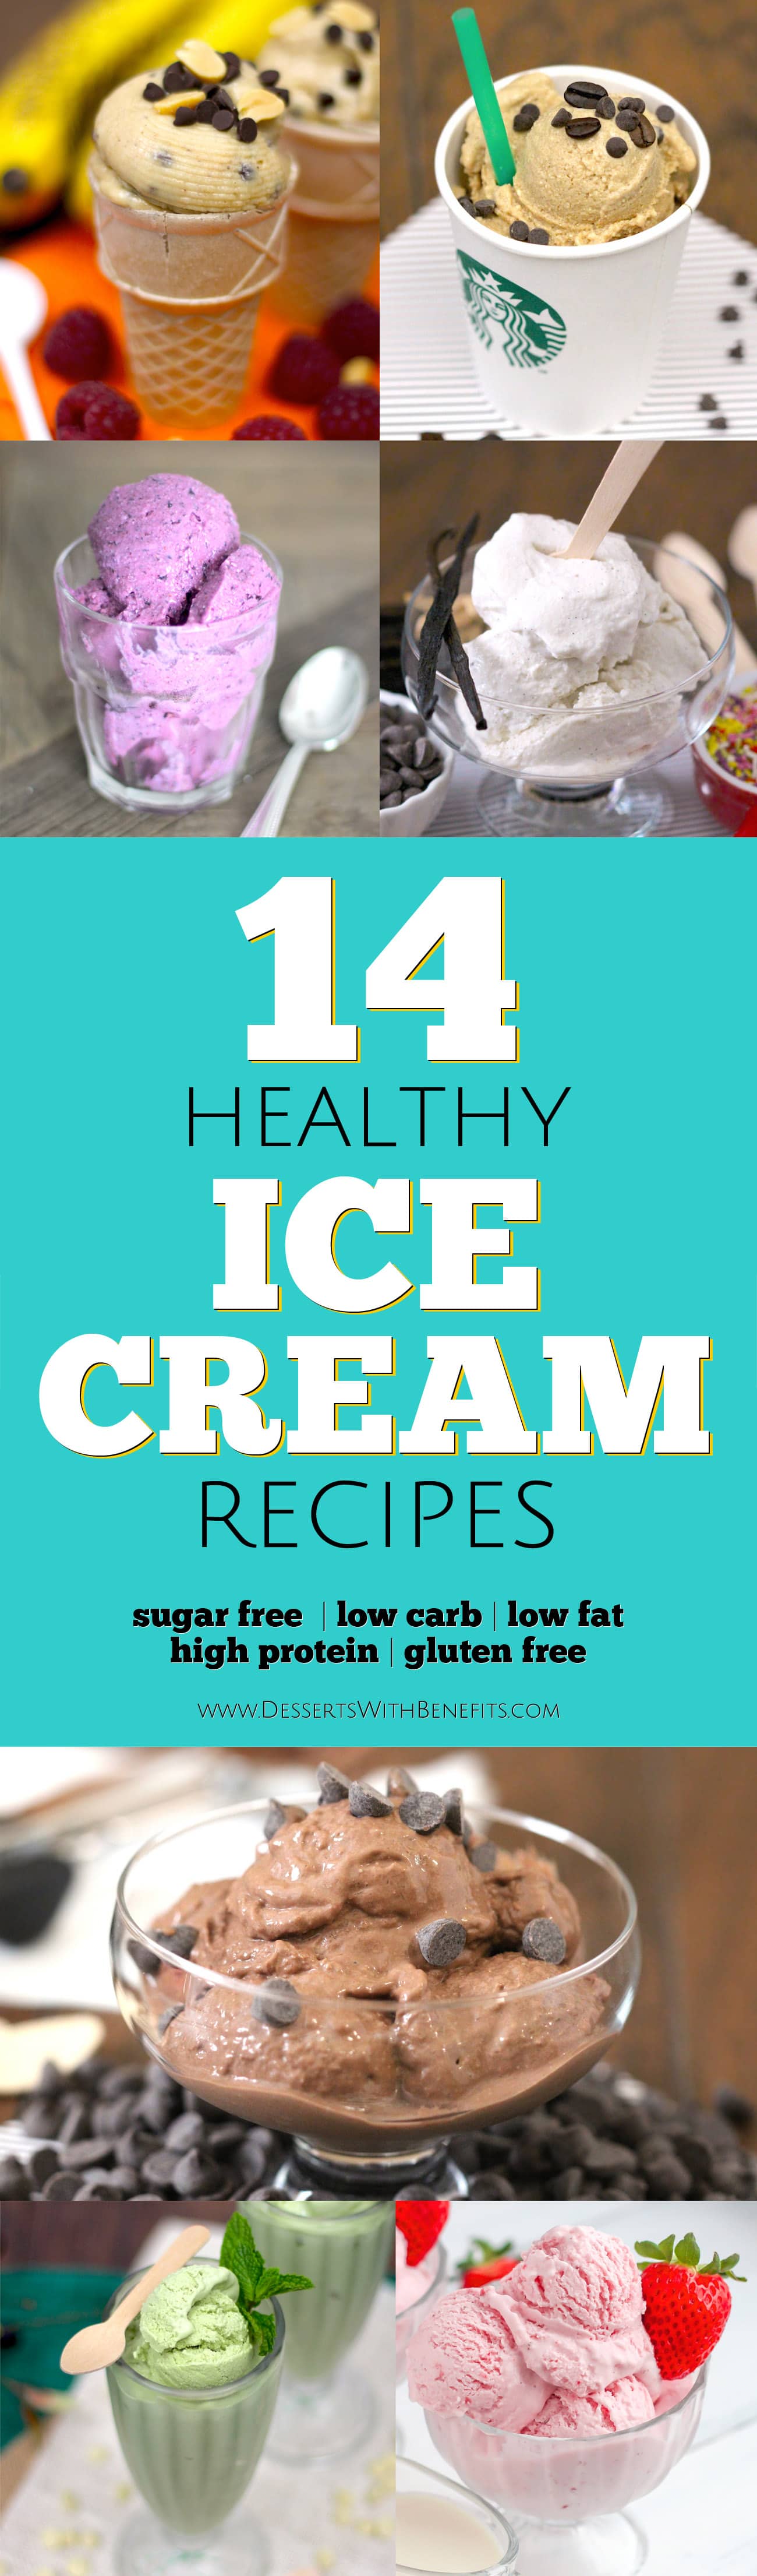 Indulge in these 14 Healthy Ice Cream recipes! You'd never know these are sugar free, low carb, low fat, and high protein (with vegan options)! -- Healthy Dessert Recipes at Desserts With Benefits